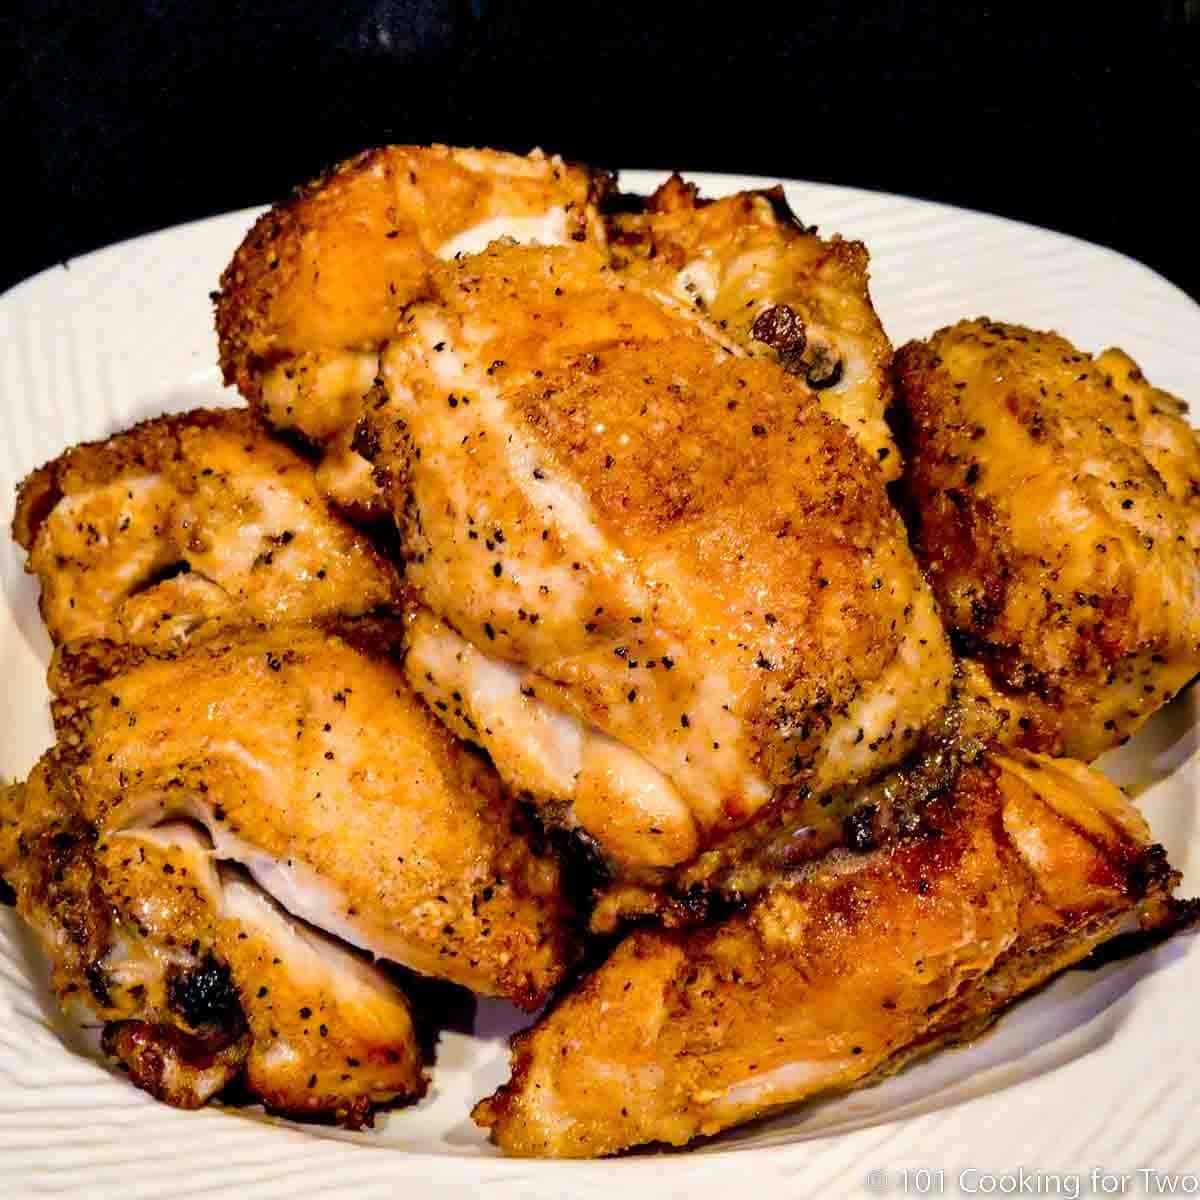 Crispy Baked Split Chicken Breasts 101 Cooking For Two,Seafood Gumbo Recipes